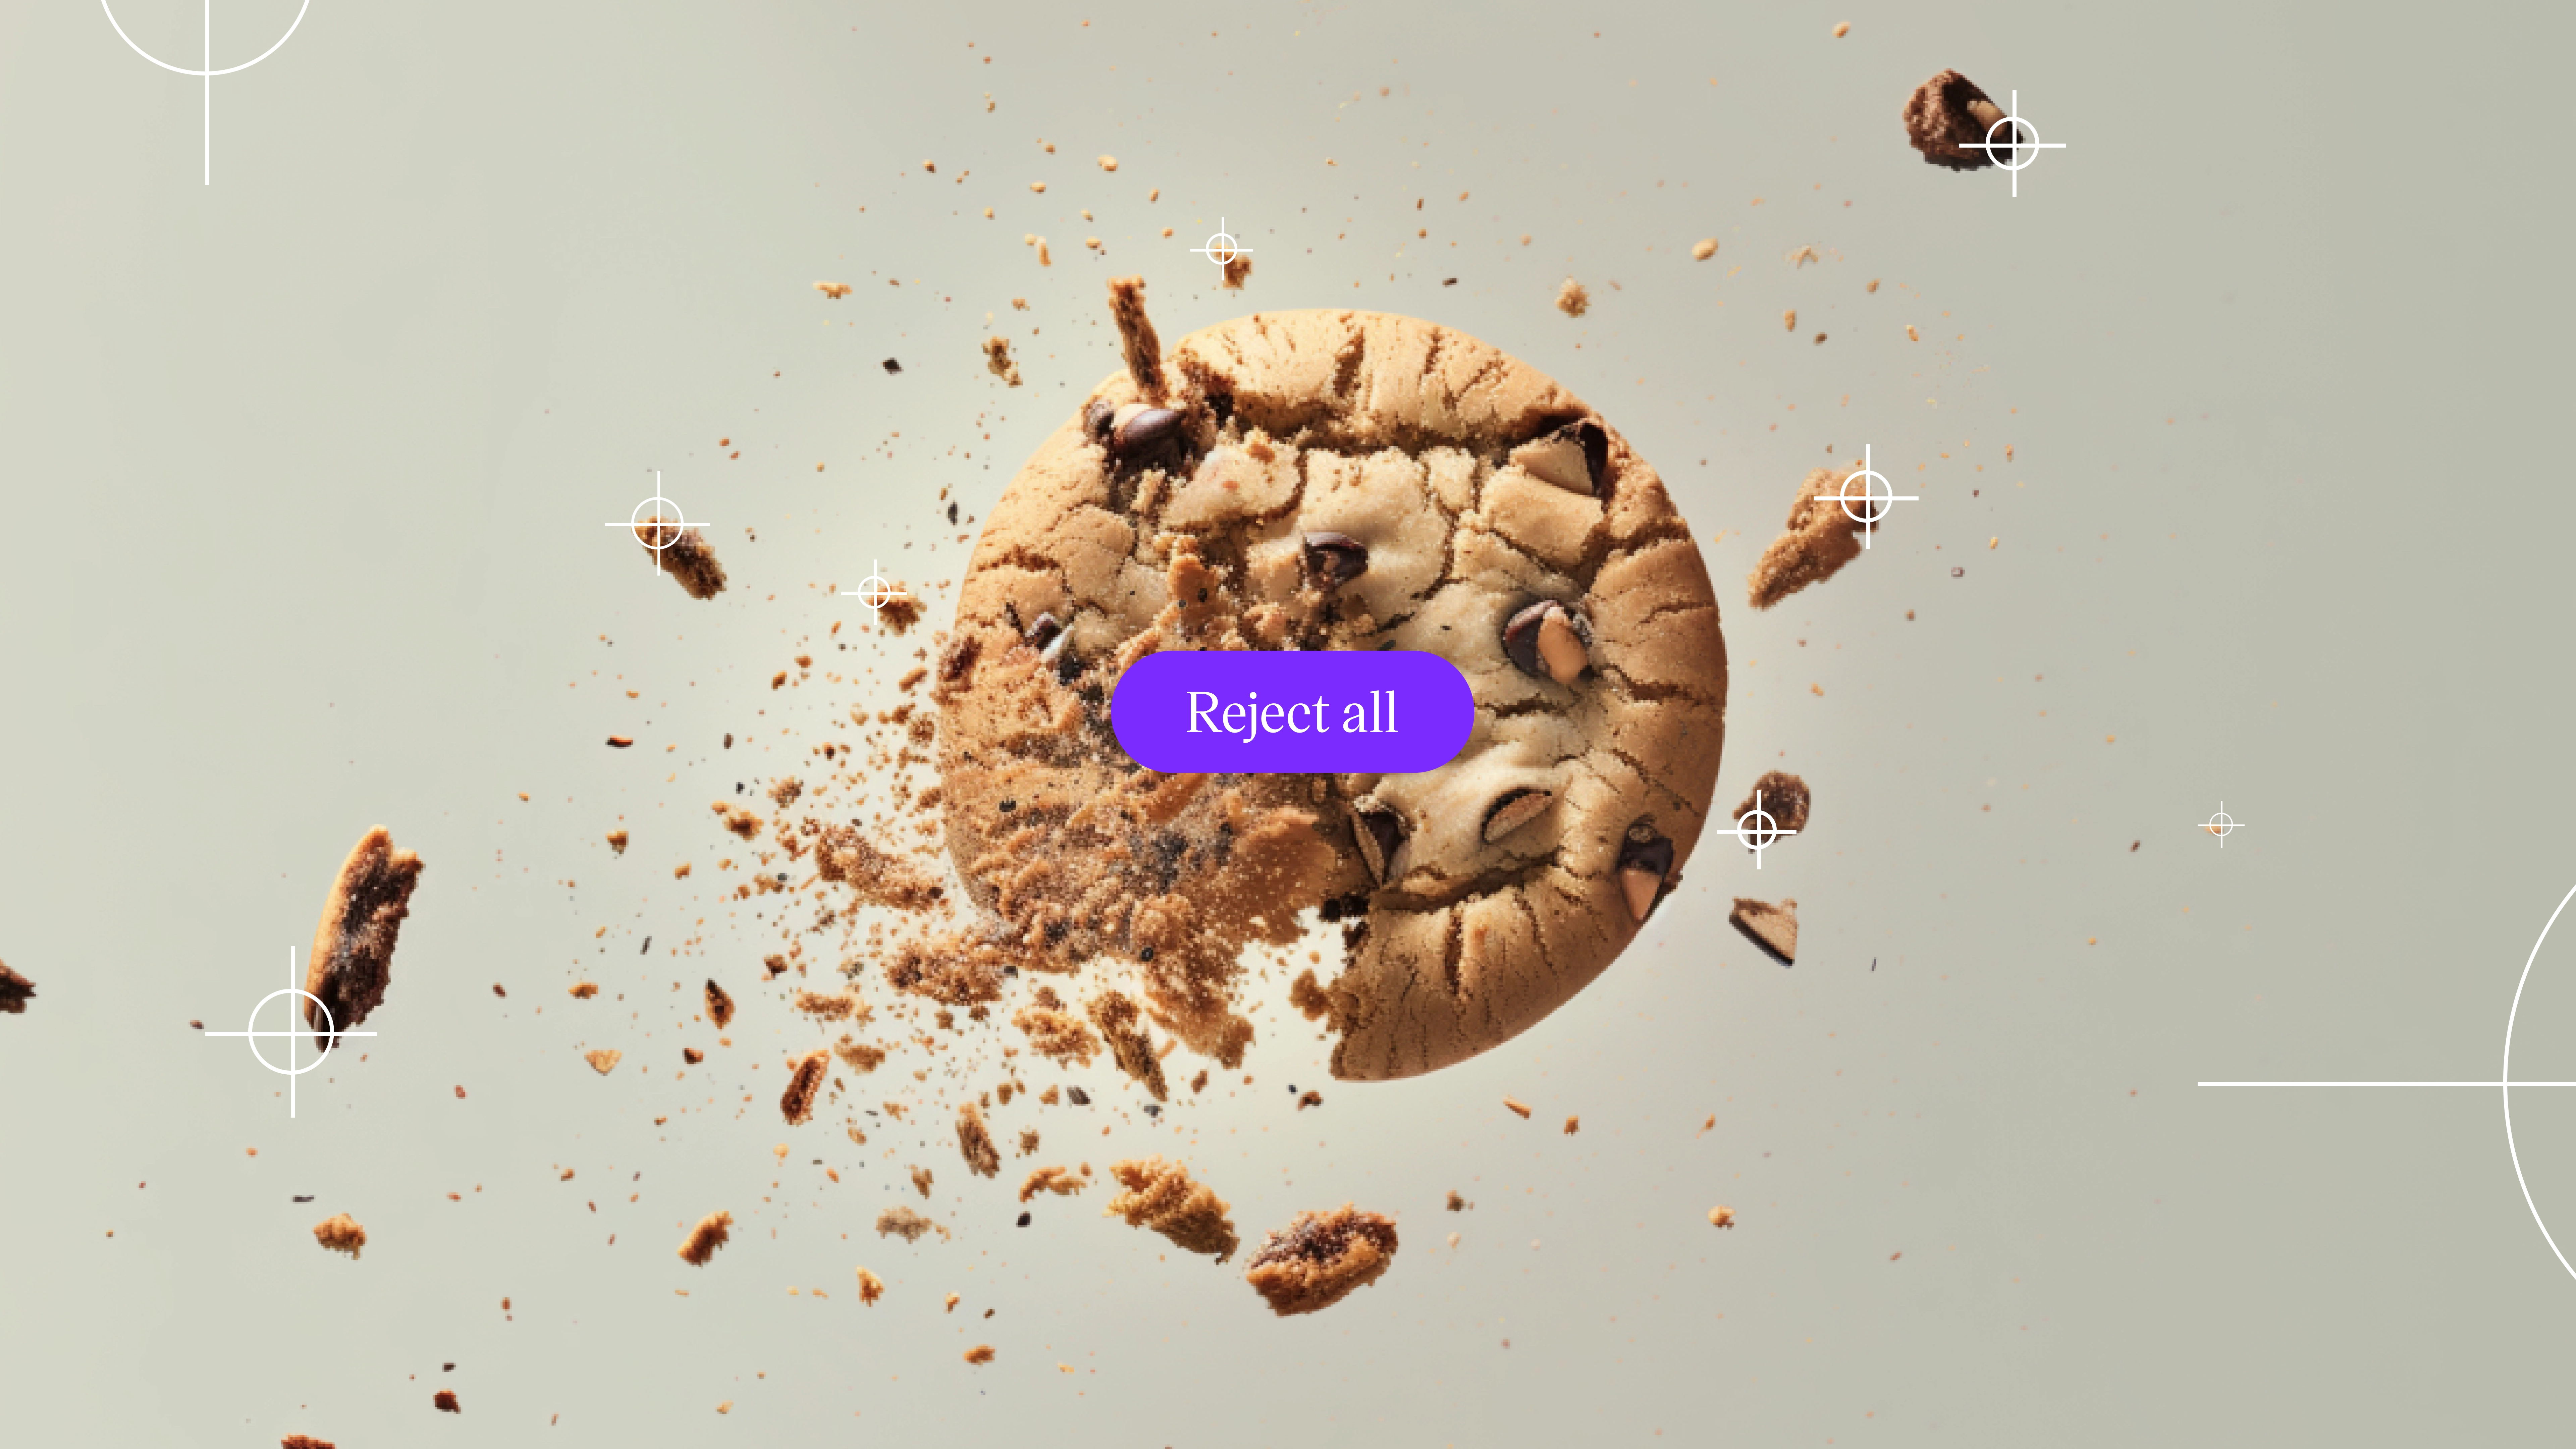 Crumbling cookies with "reject all" button